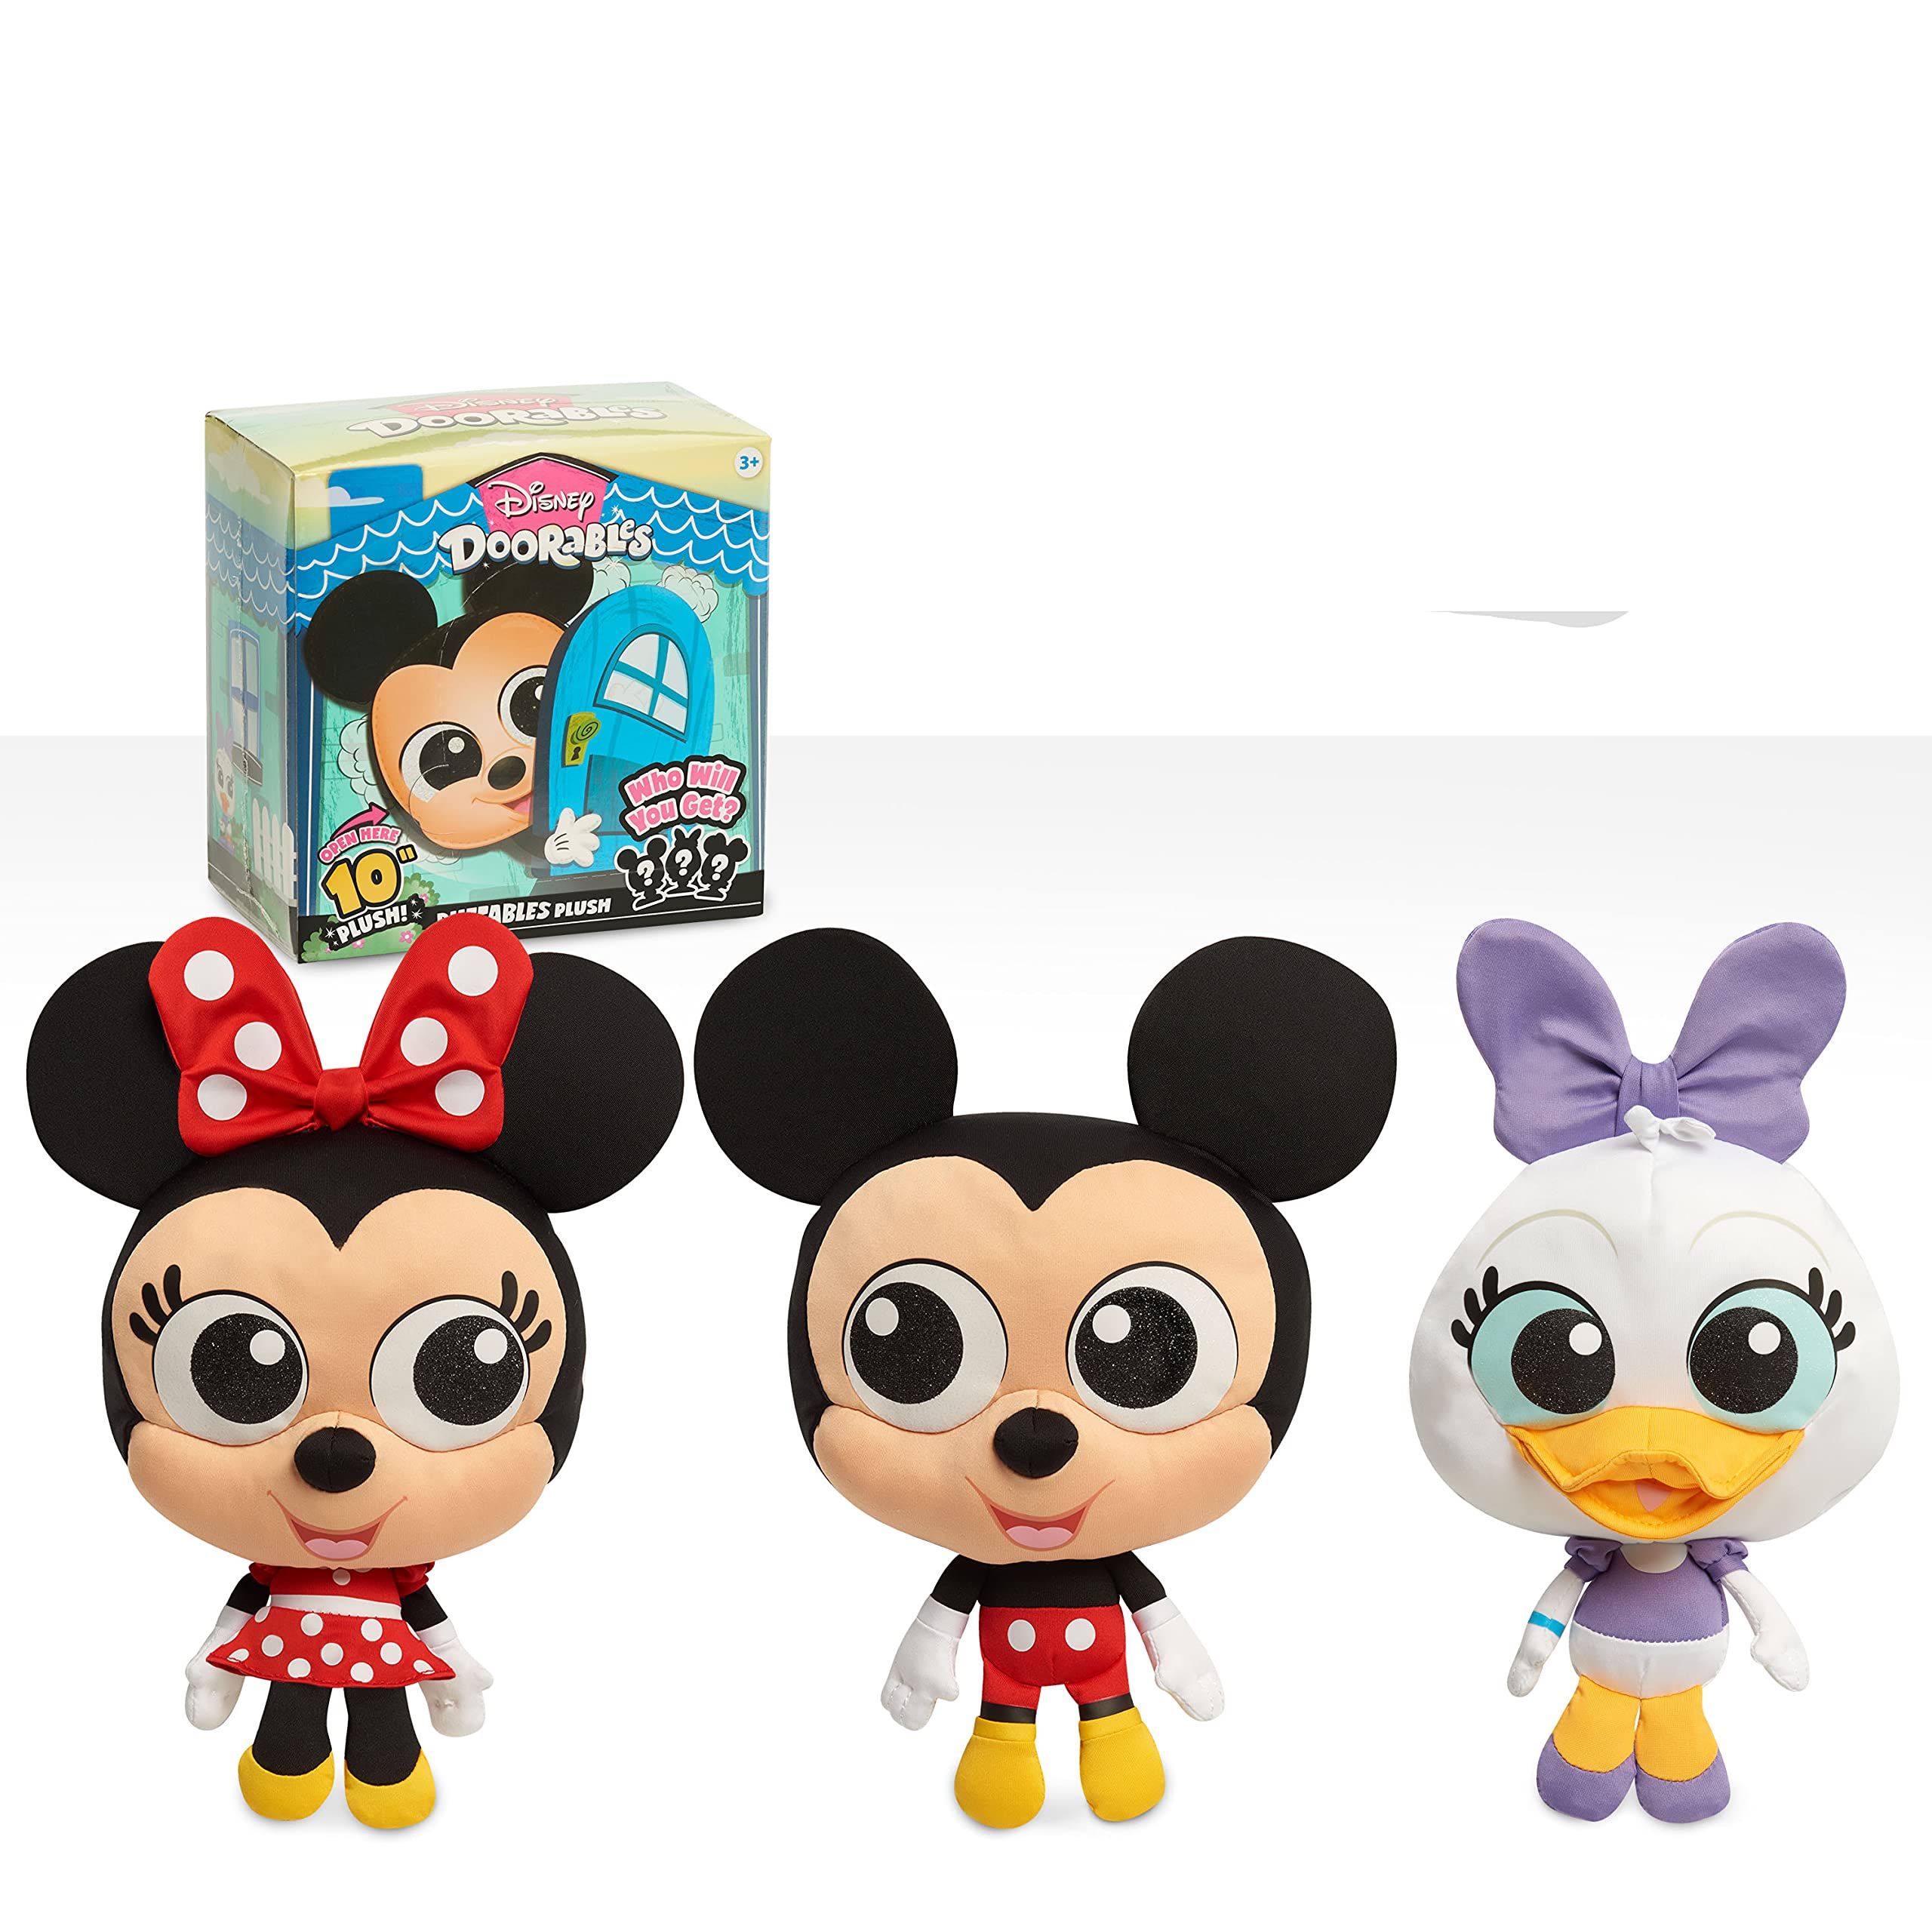 Disney Doorables Puffables Plush, Disney Mickey Mouse and Friends, 10-Inch Squishy Plush Featuring glitter Eyes, Styles May Vary